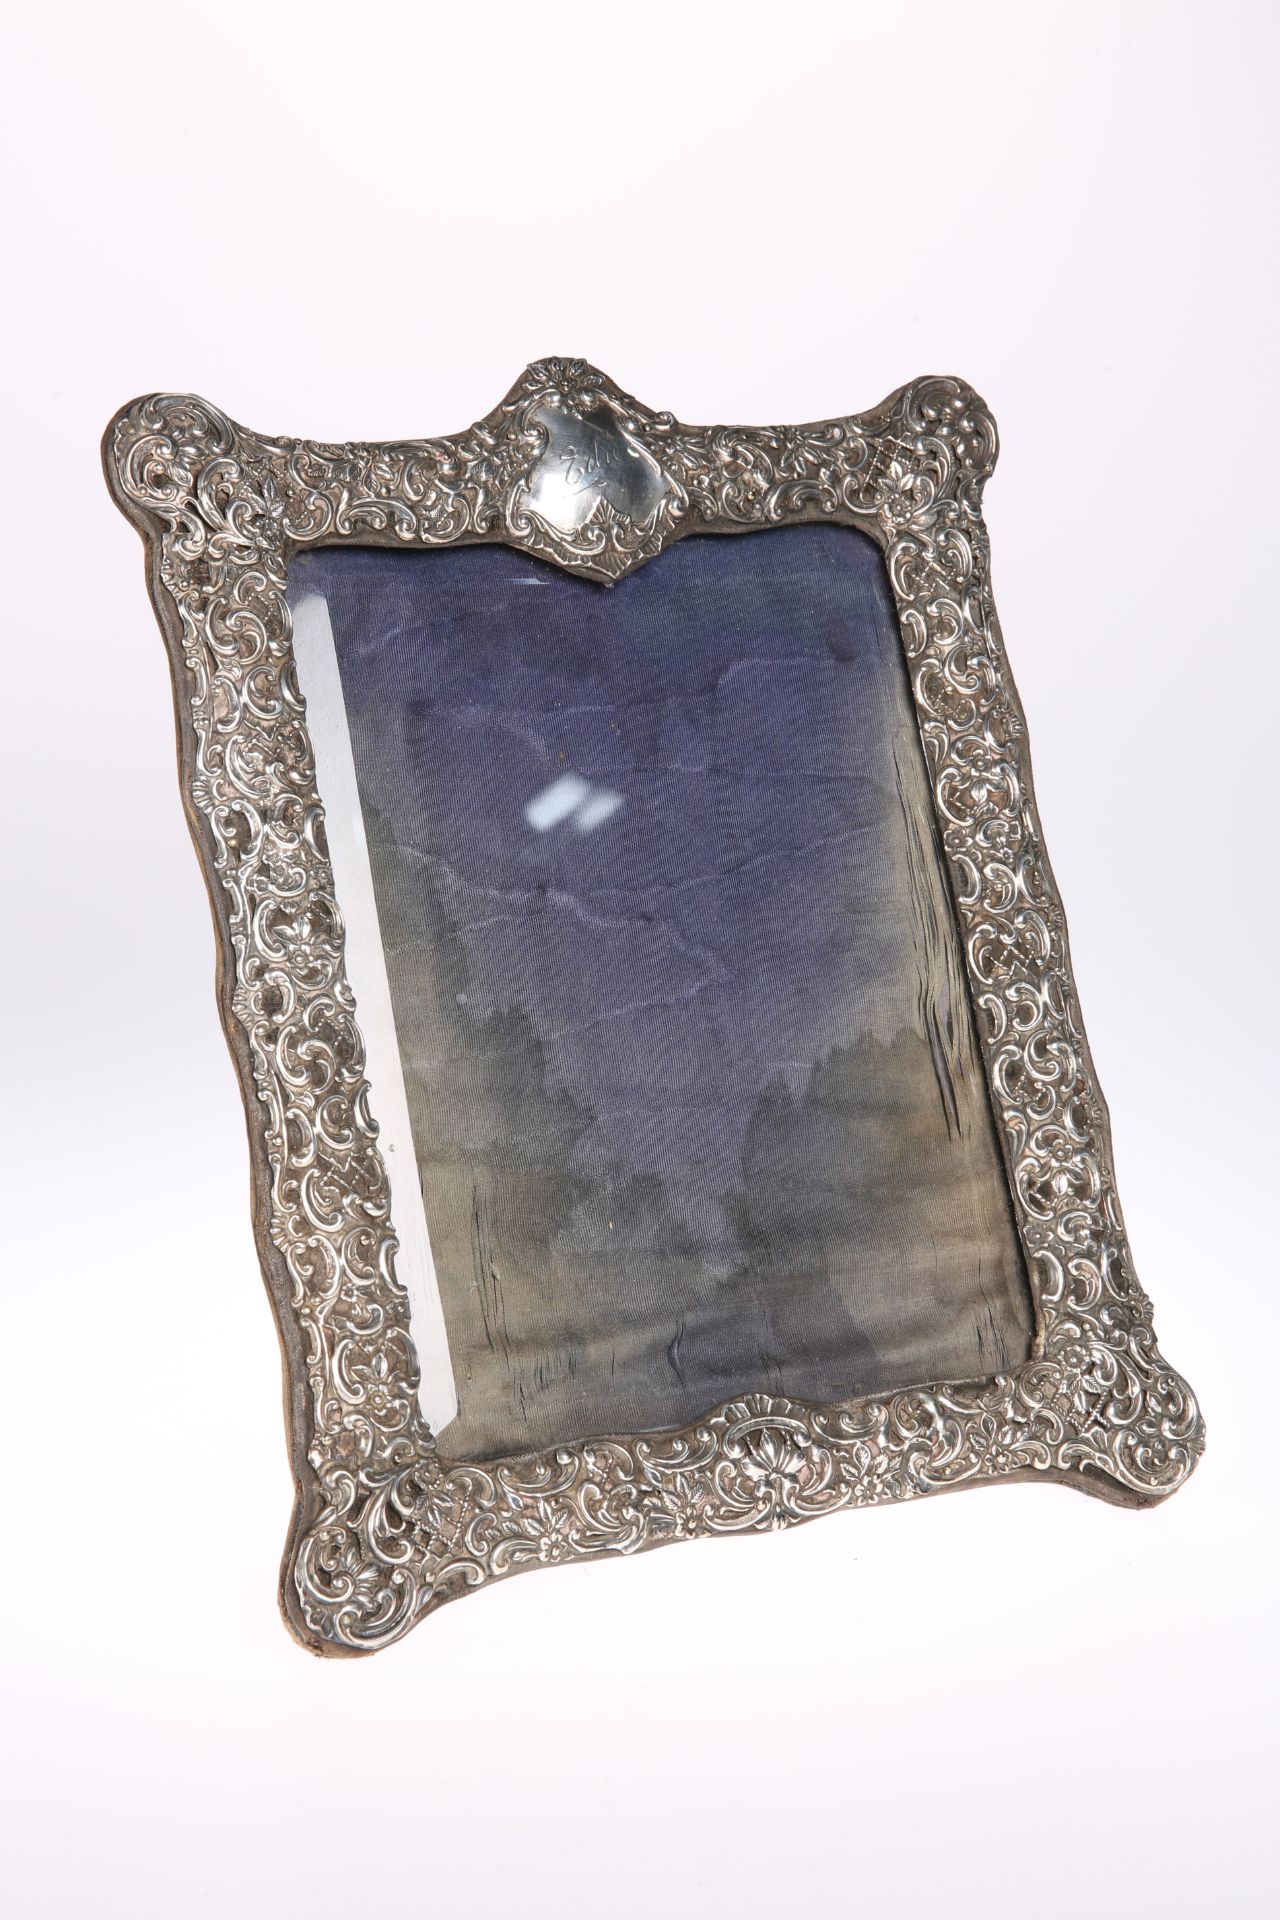 A VICTORIAN SILVER STRUT PHOTOGRAPH FRAME, by Henry Matthews, Chester 1898, of rectangular shaped